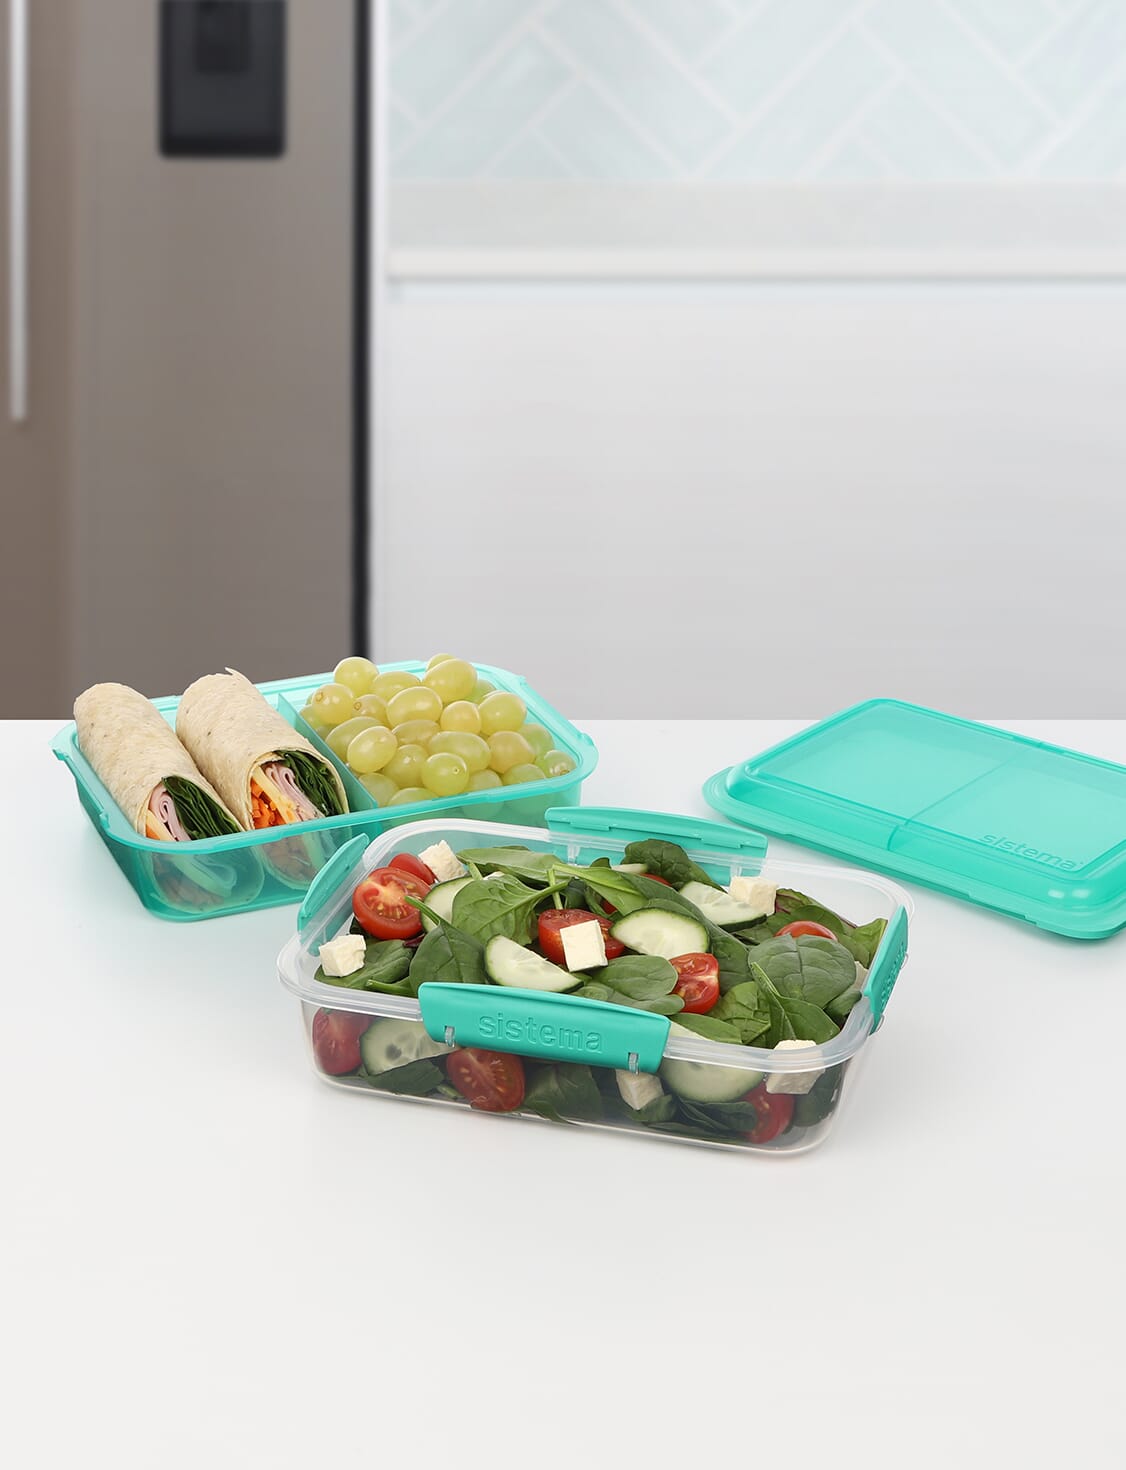 Sistema TO GO lunch stack rectangle 1.8L